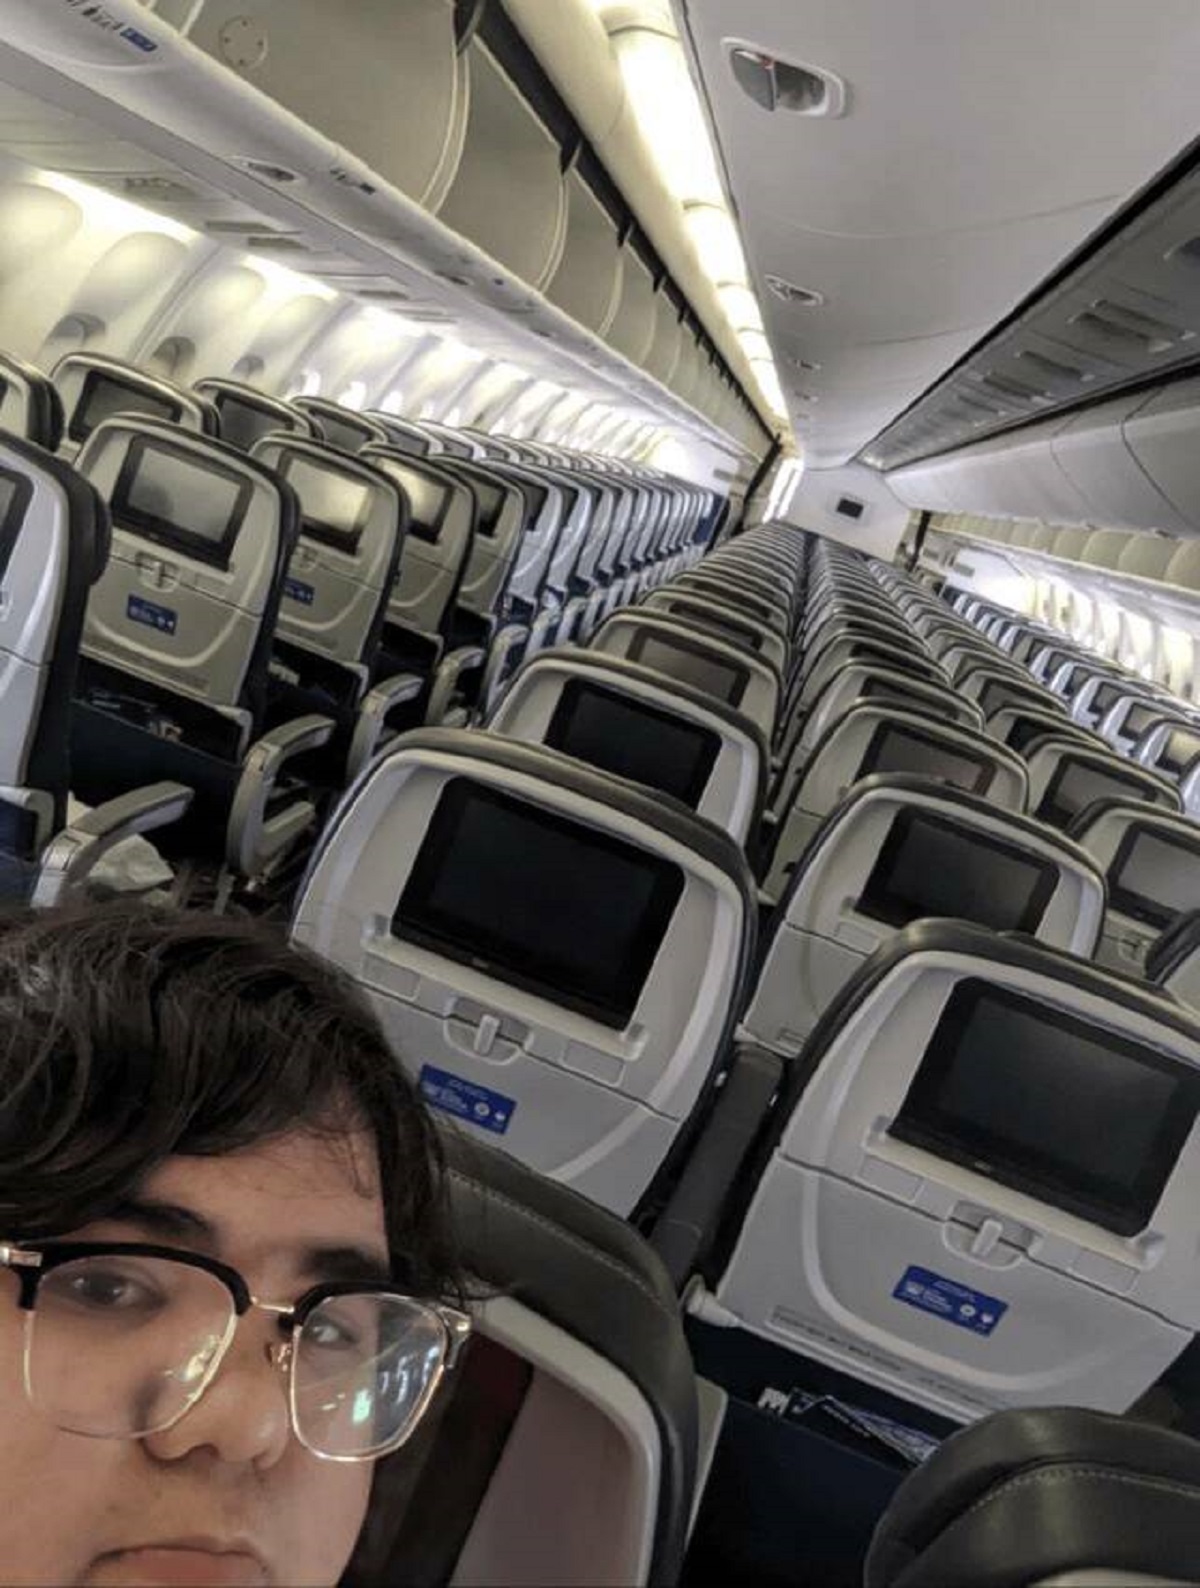 "I'm the only one on this flight"